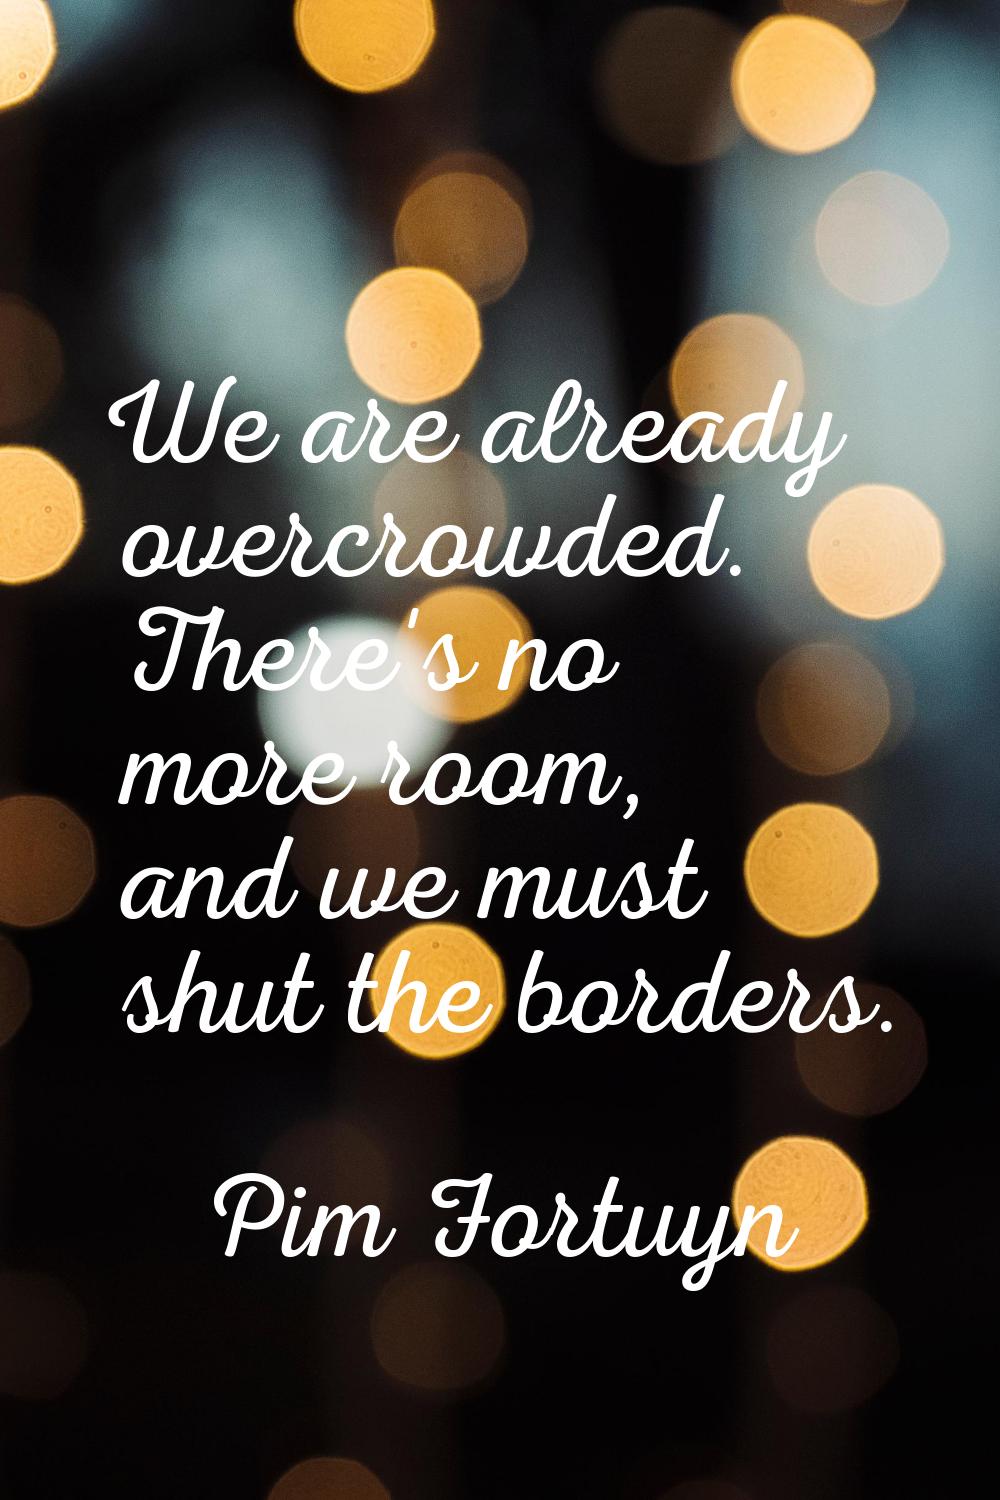 We are already overcrowded. There's no more room, and we must shut the borders.